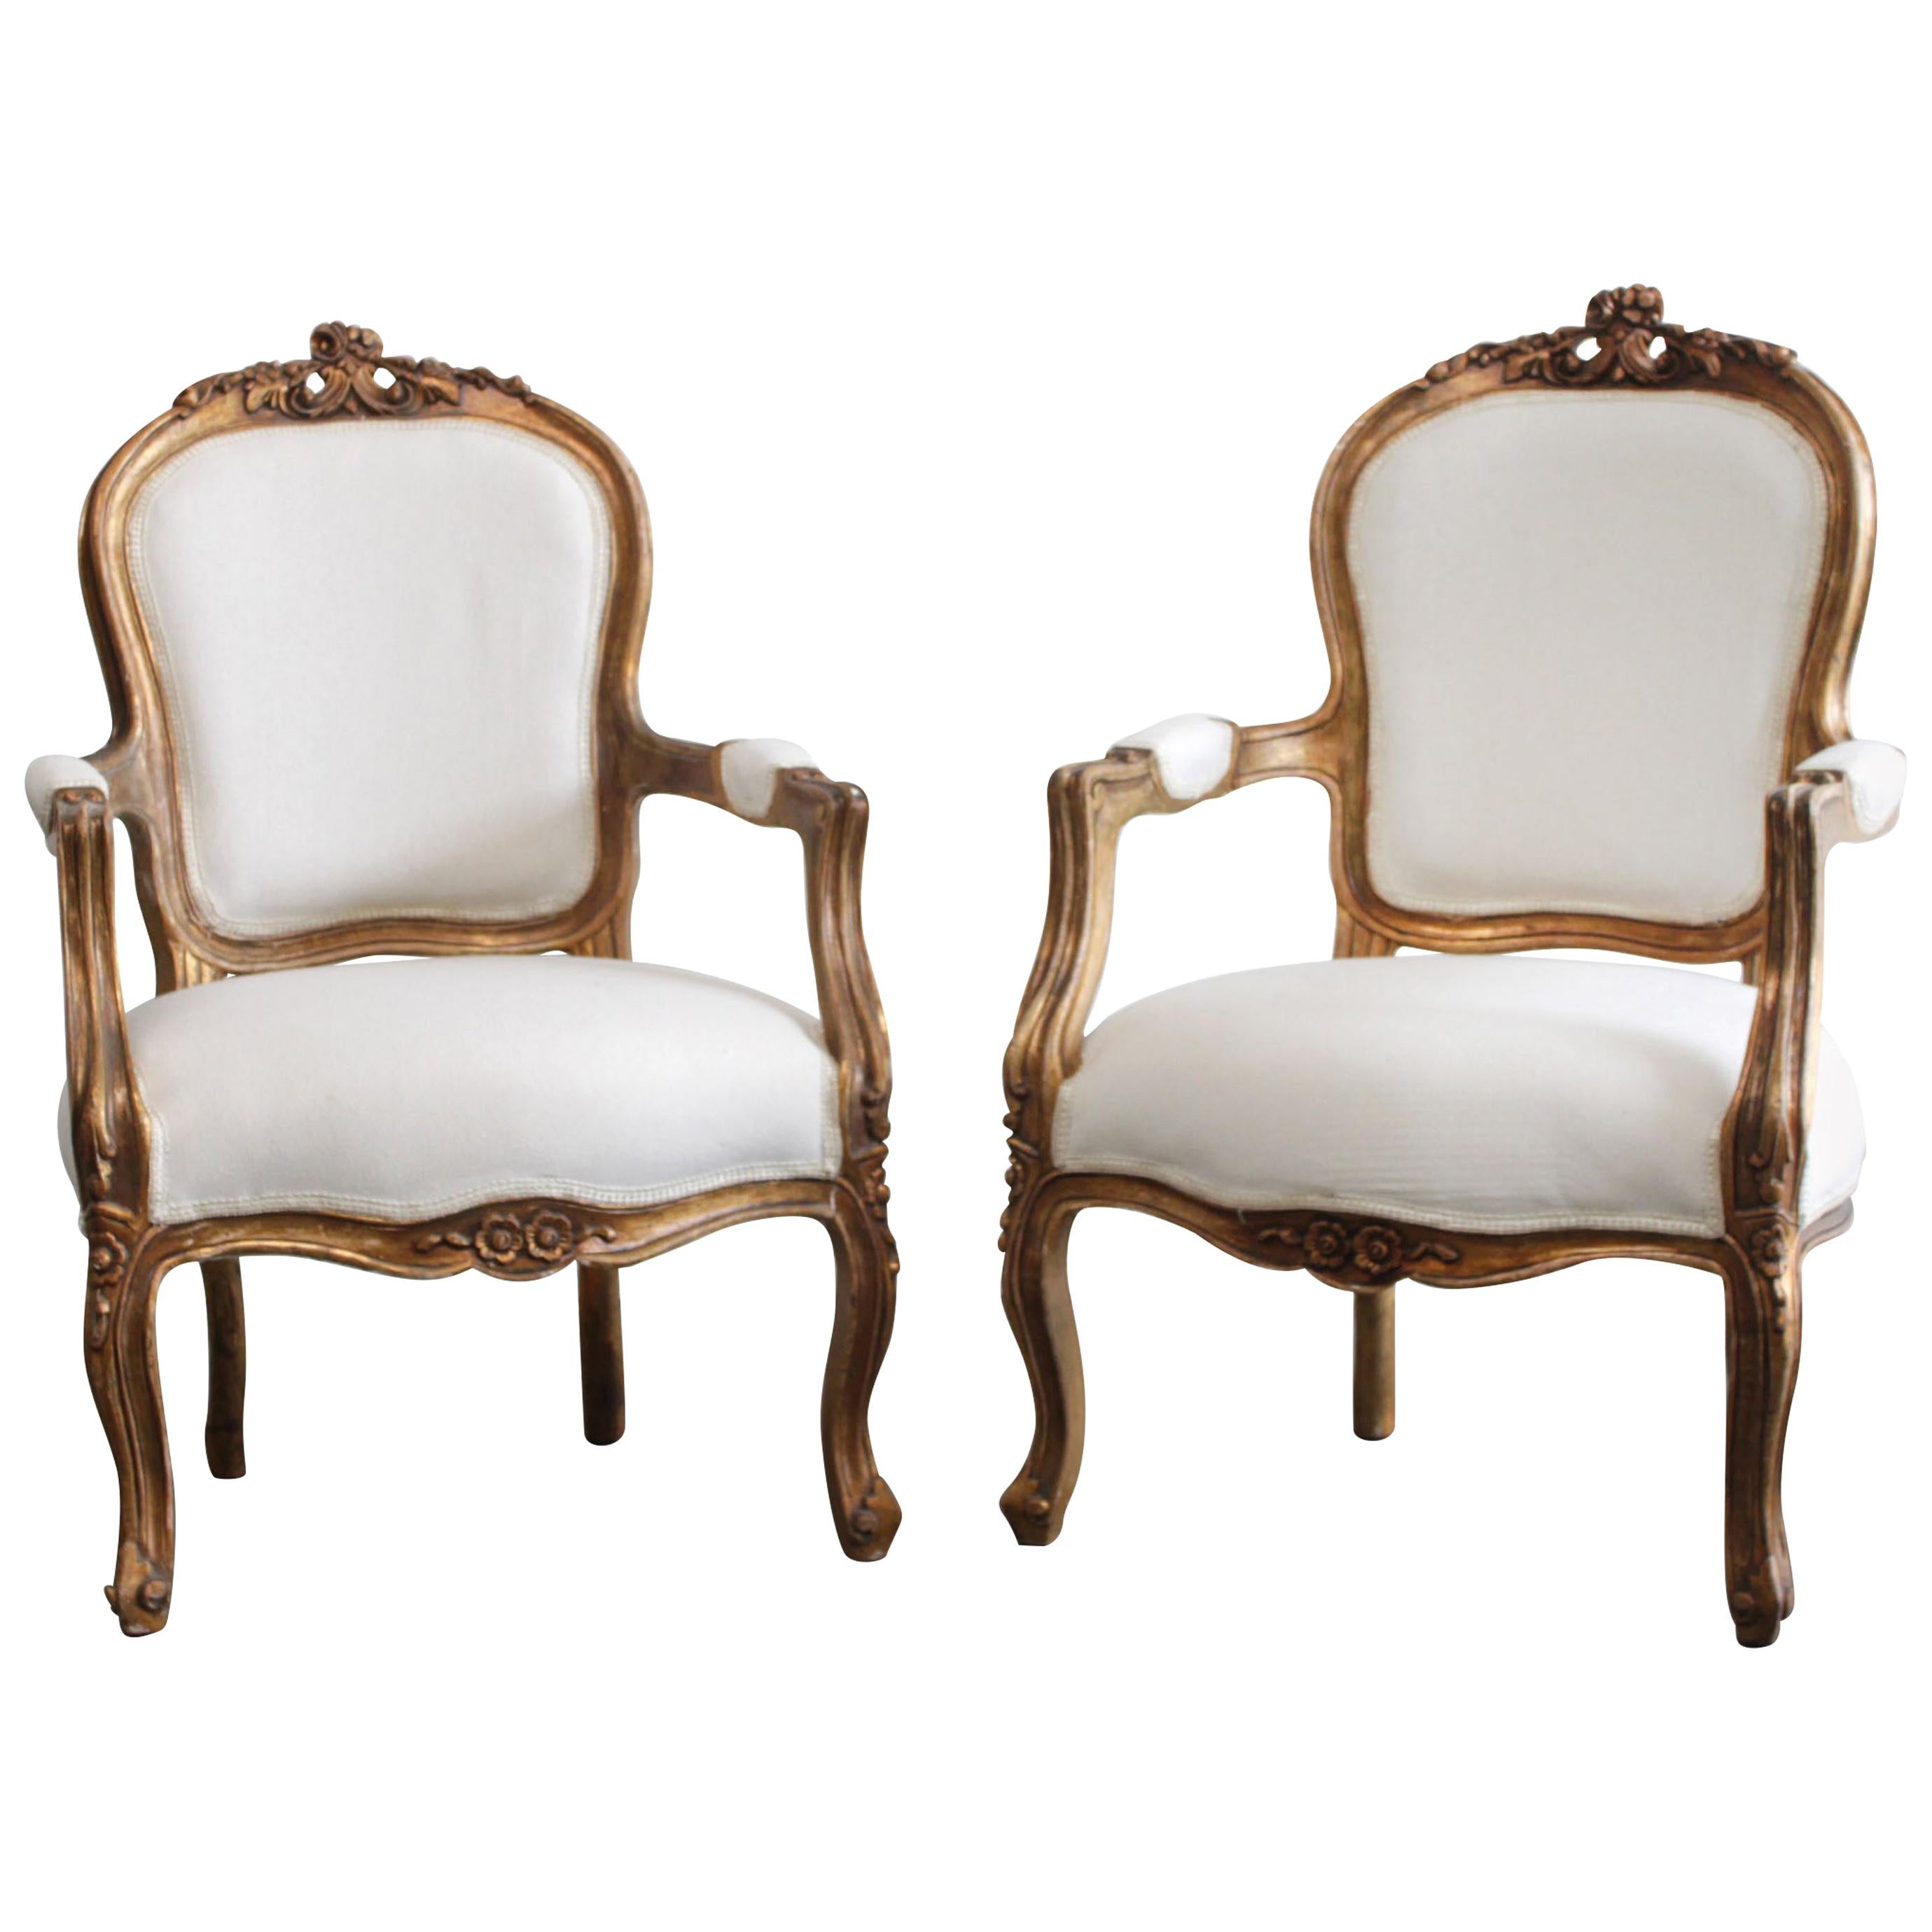 Pair of Vintage Aged Giltwood Louis XV Style Open Armchairs